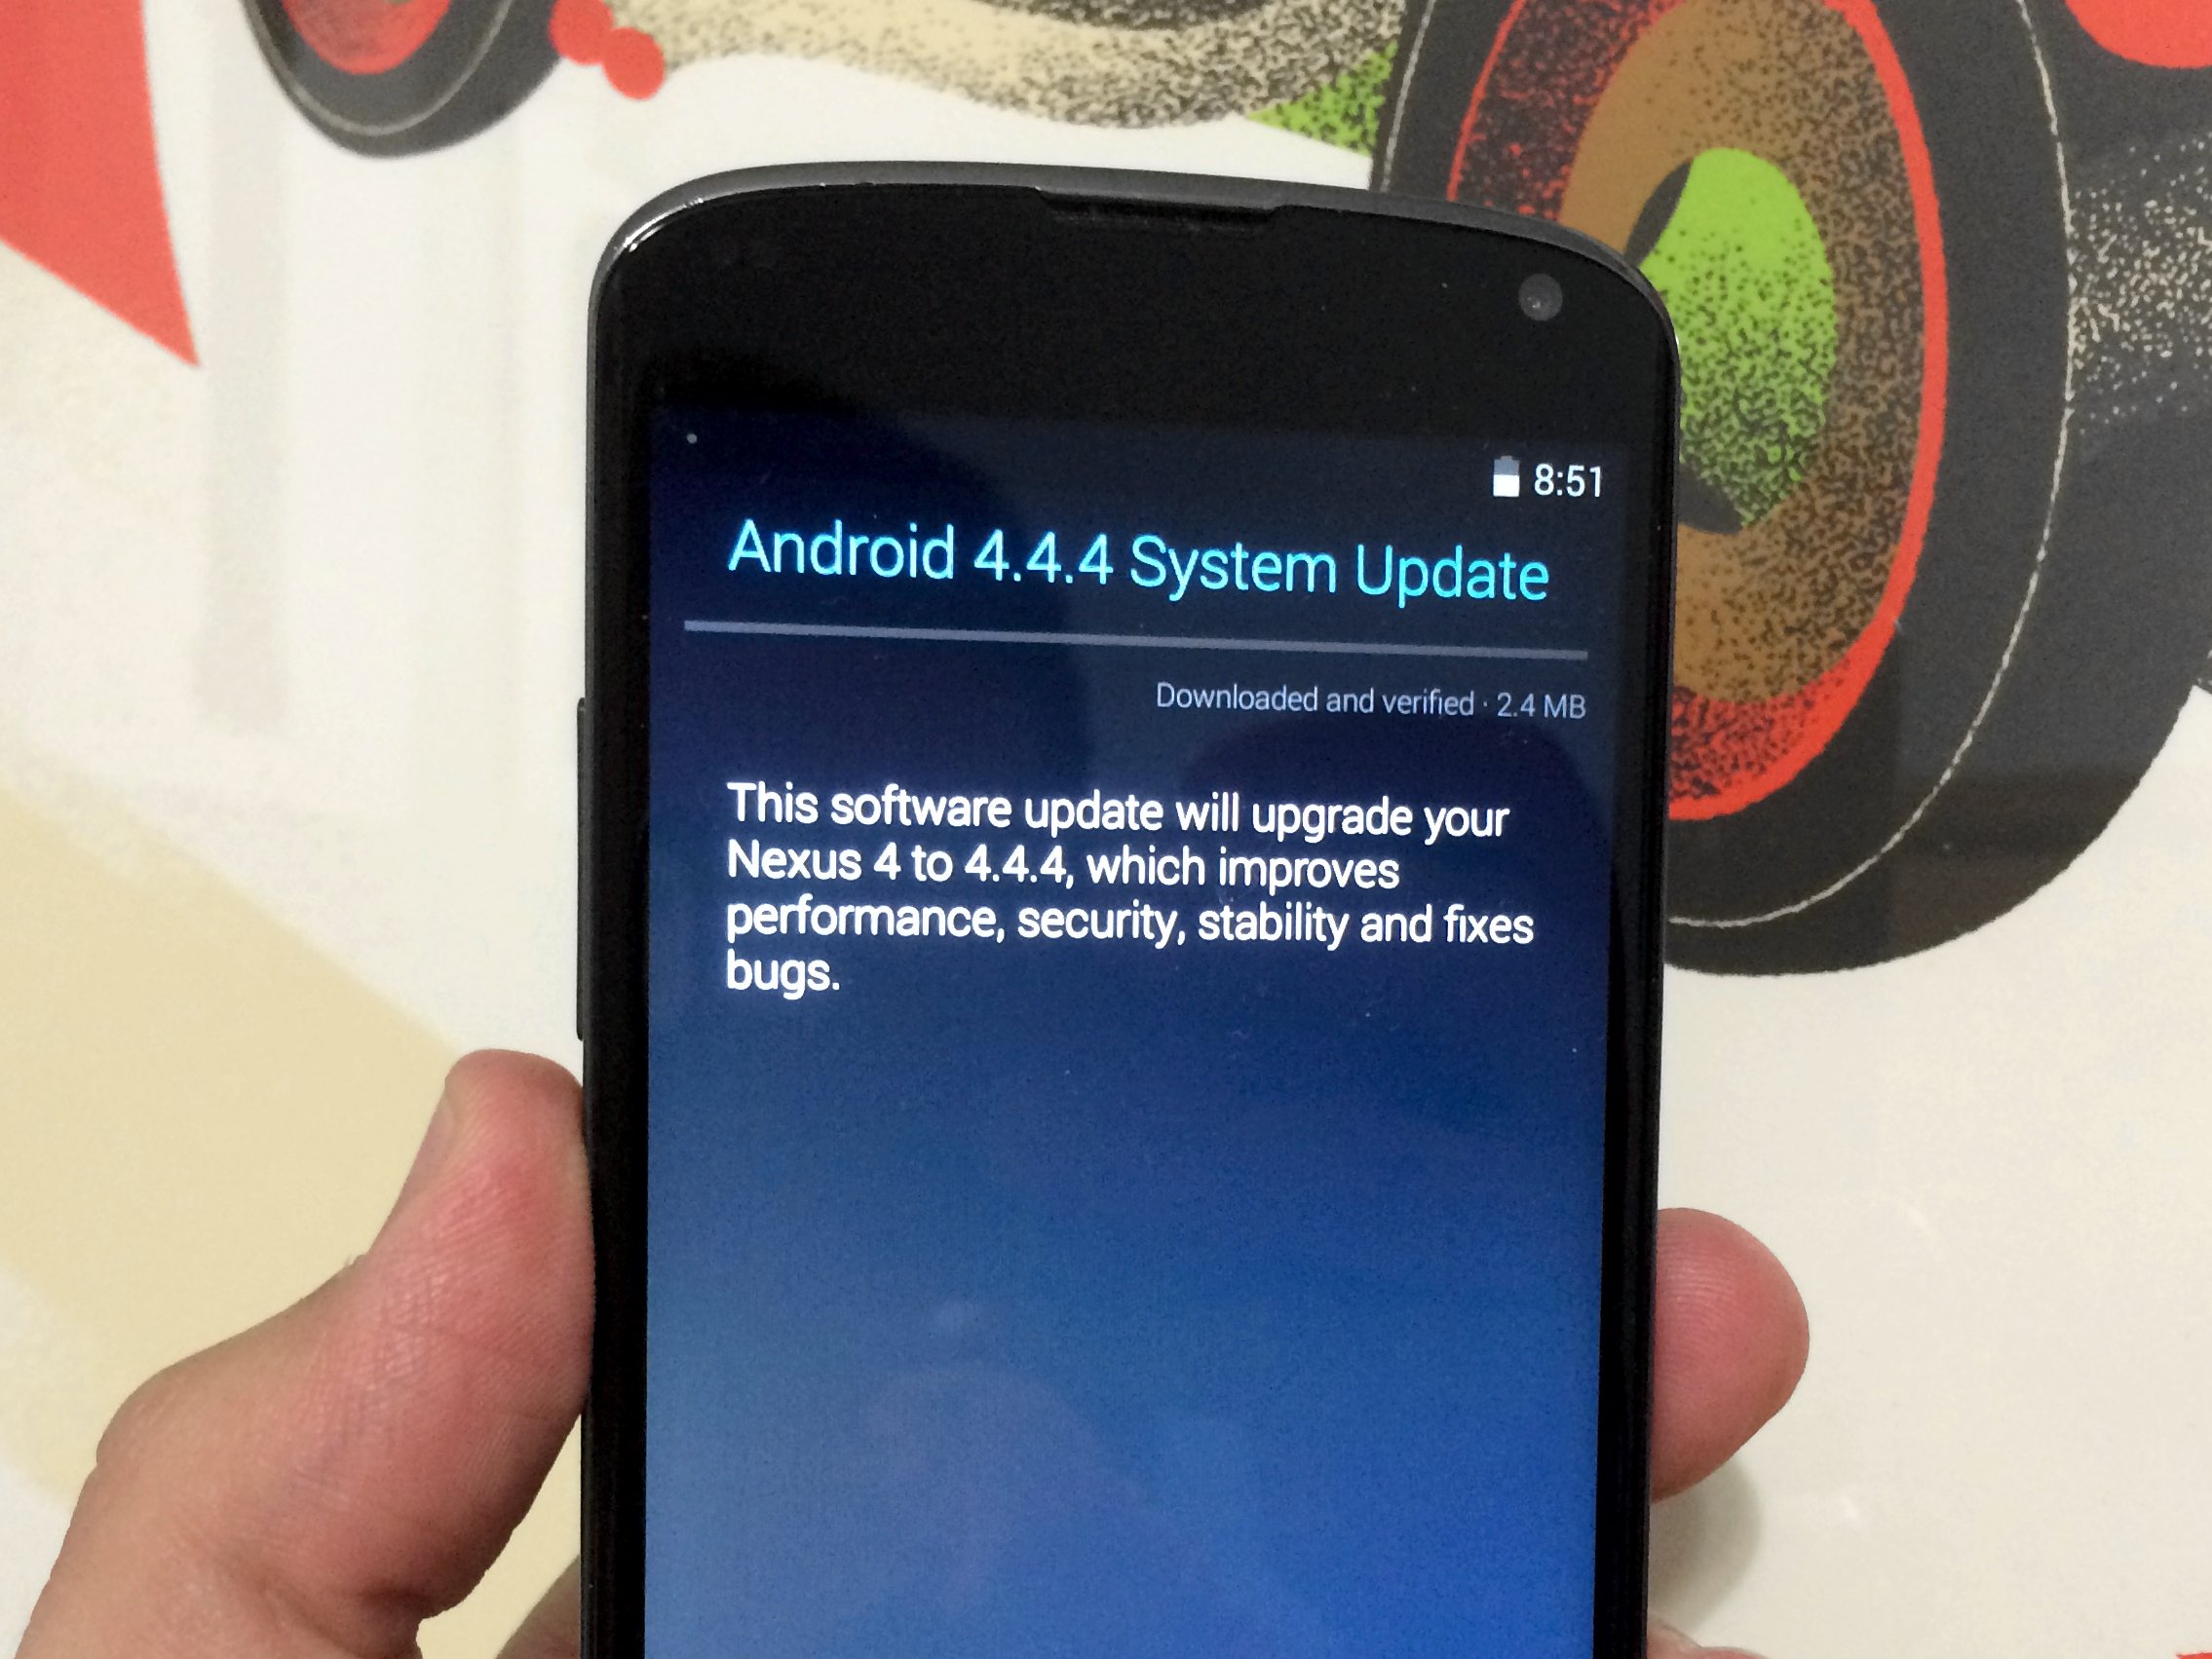 Installing Android 4.4.4 was painless, once the Nexus 4 was charged up enough.